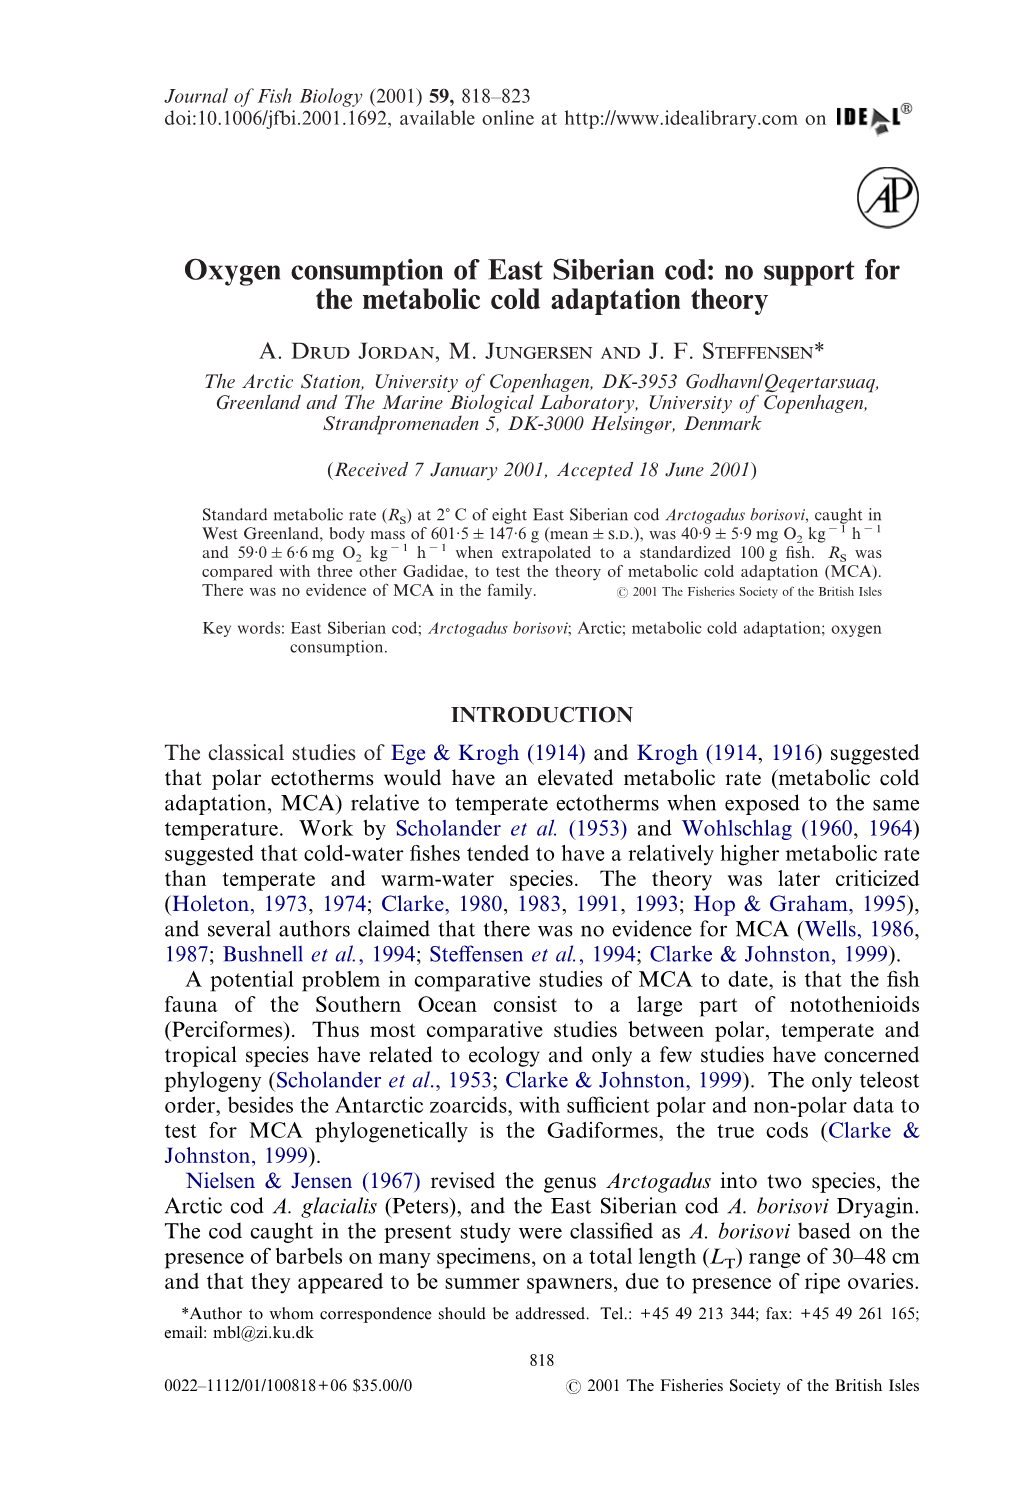 Oxygen Consumption of East Siberian Cod: No Support for the Metabolic Cold Adaptation Theory